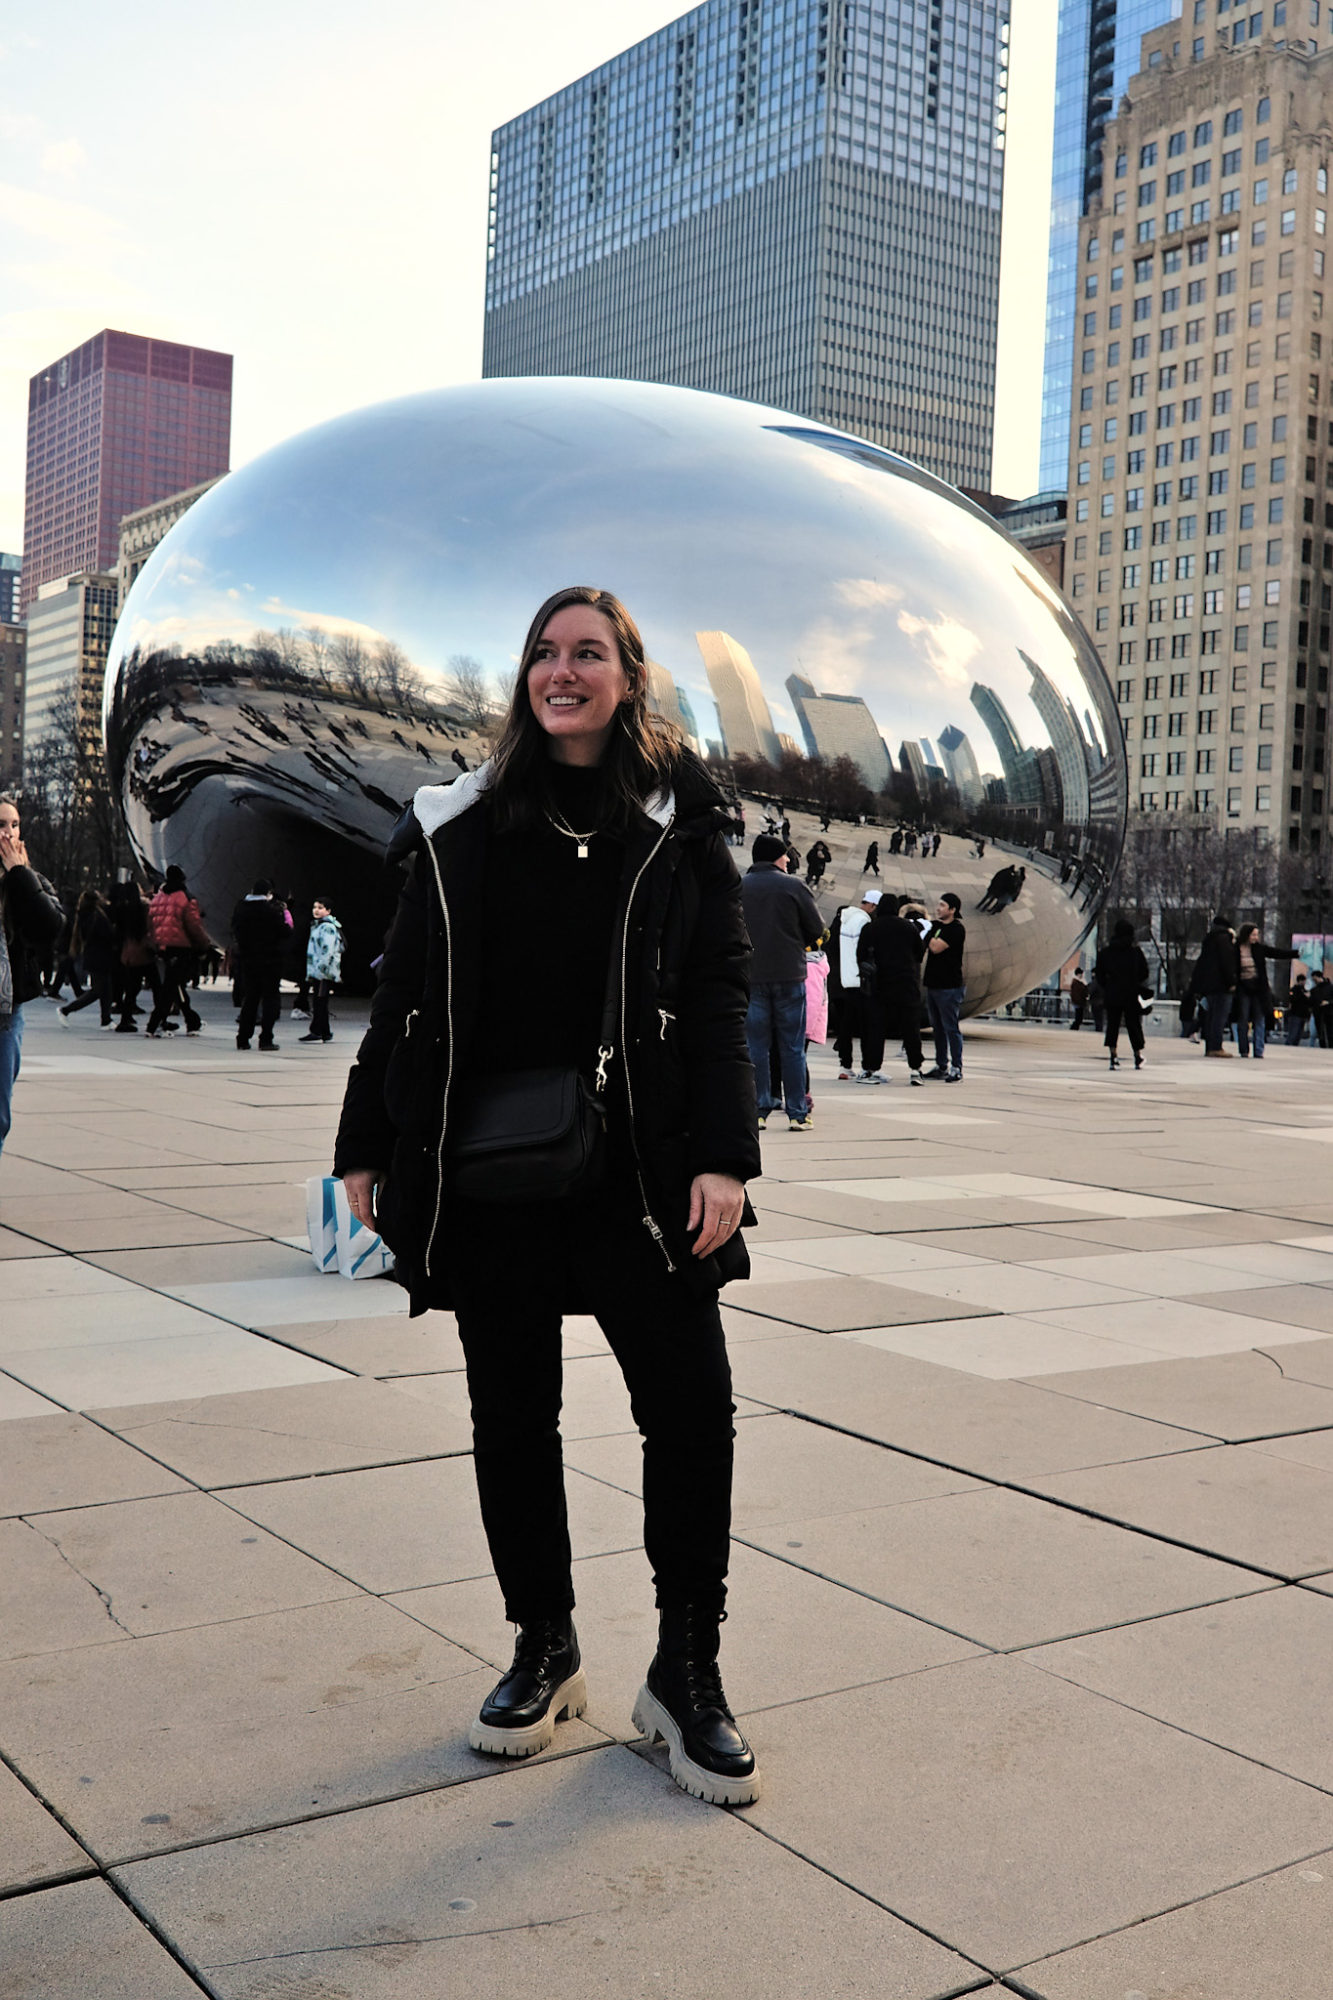 Alyssa wears all black and stands in front of the bean